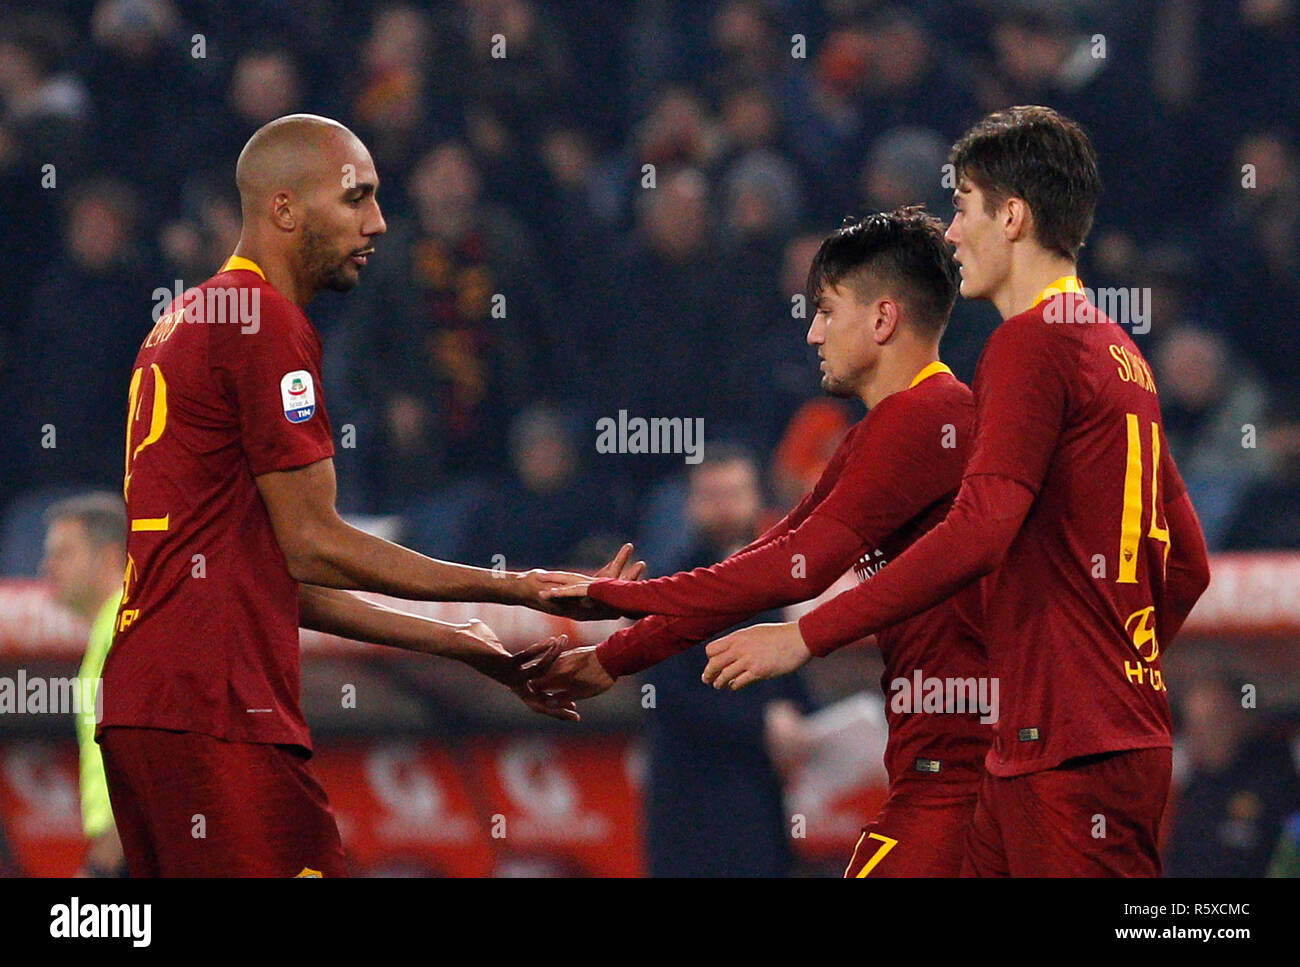 Rome, Italy. 2nd Dec, 2018. Roma's Cengiz Under, center, celebrates with his teammates Steven Nzonzi, left, and Patrik Schick, after scoring during the Serie A soccer match between Roma and Inter at the Olympic Stadium. Credit: UPDATE IMAGES/ Alamy Live News Stock Photo